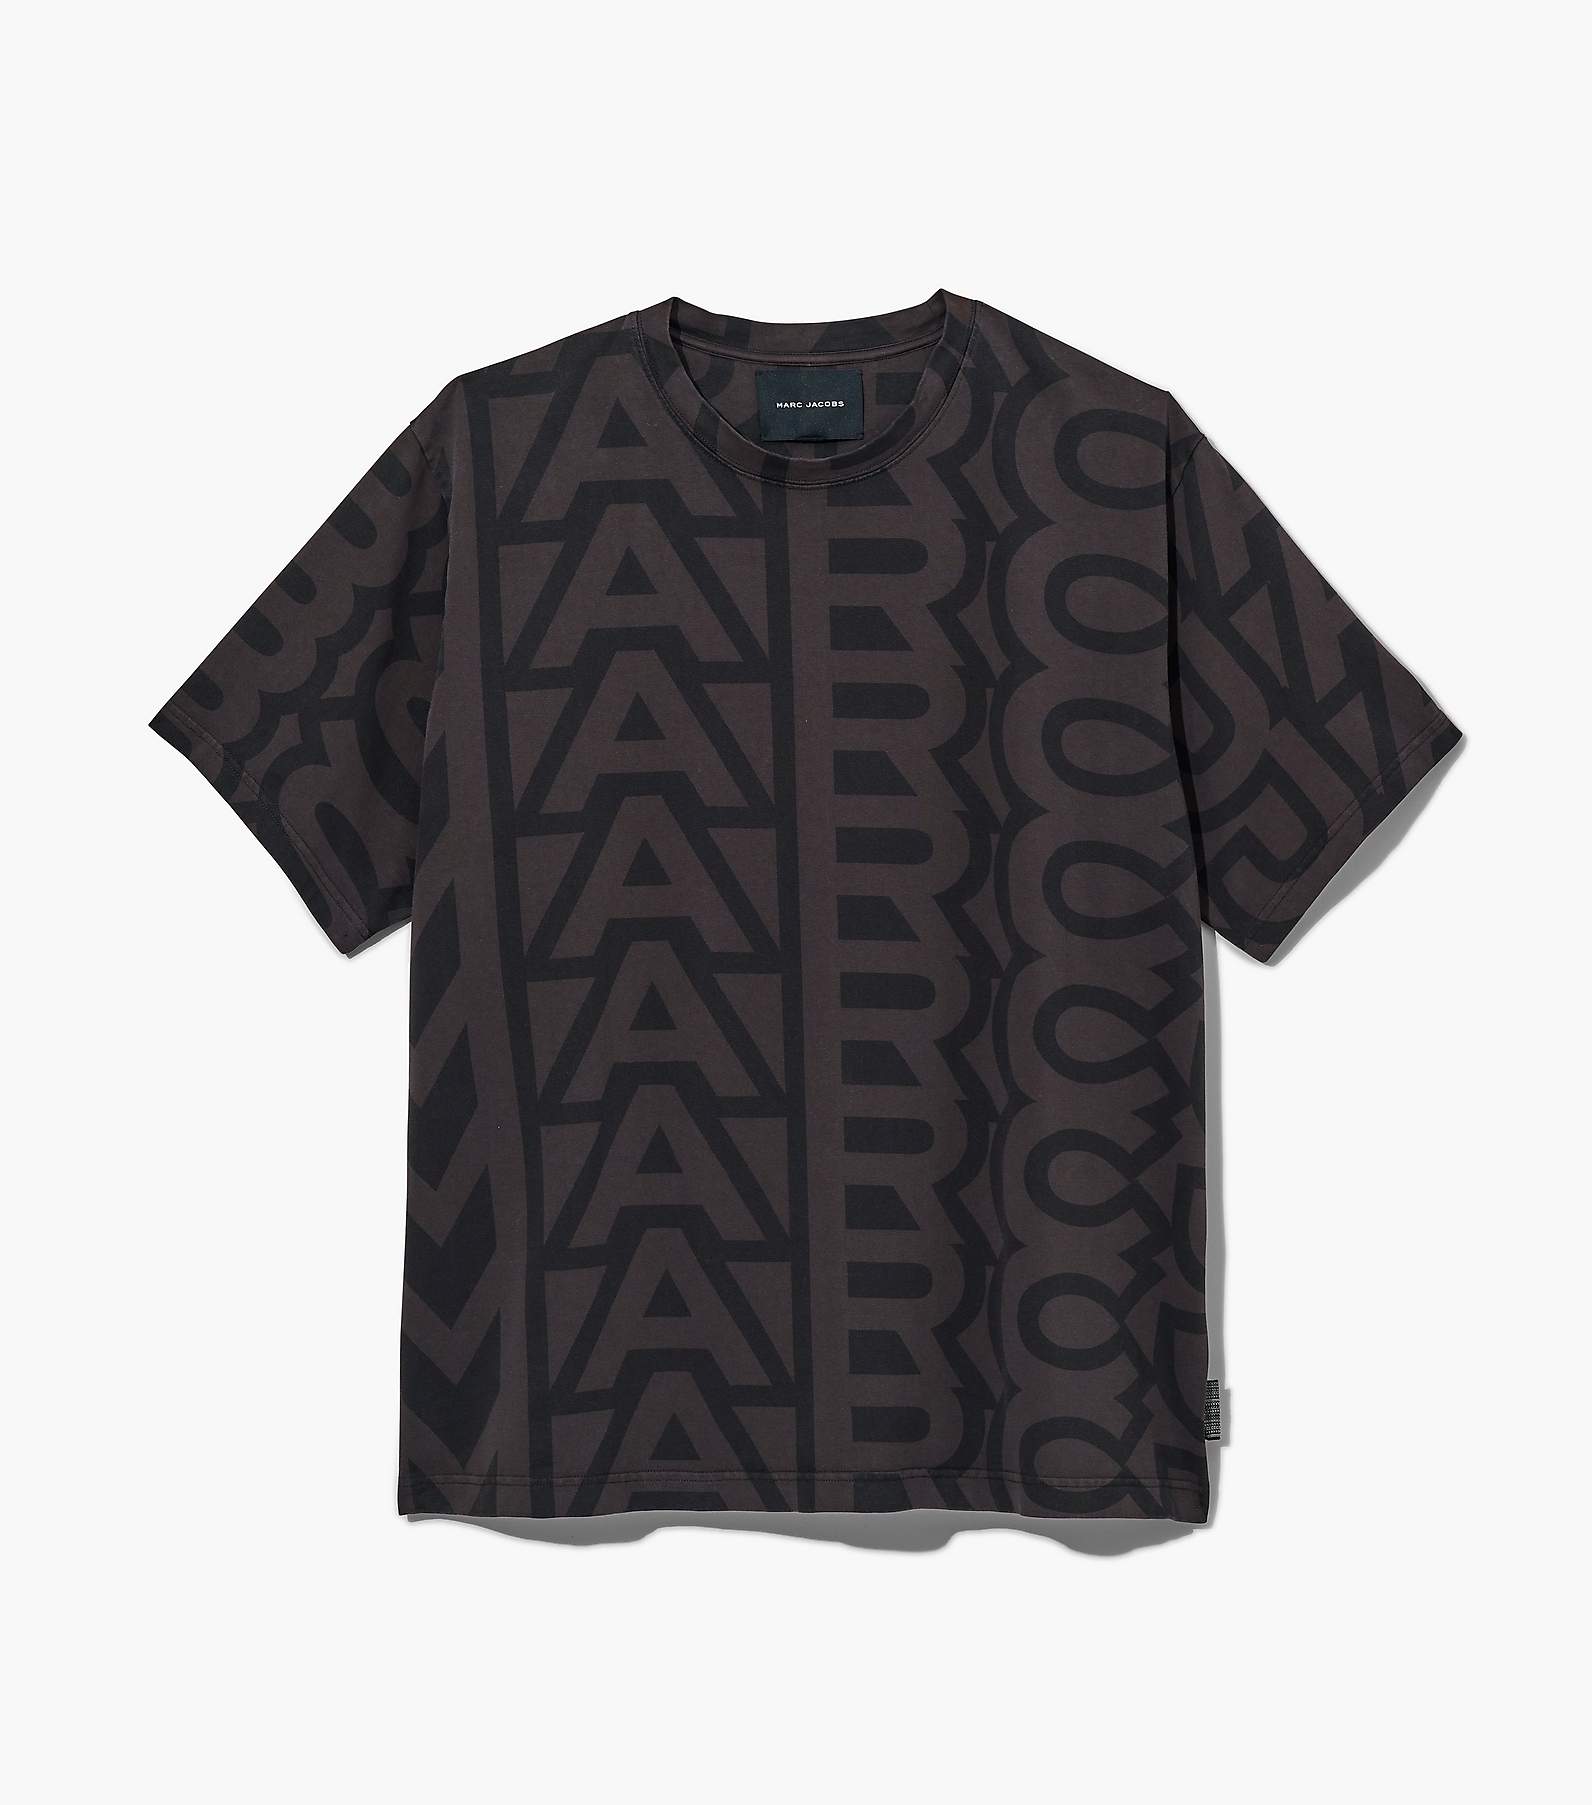 Marc Jacobs The Monogram Big T-Shirt in Black/Ivory